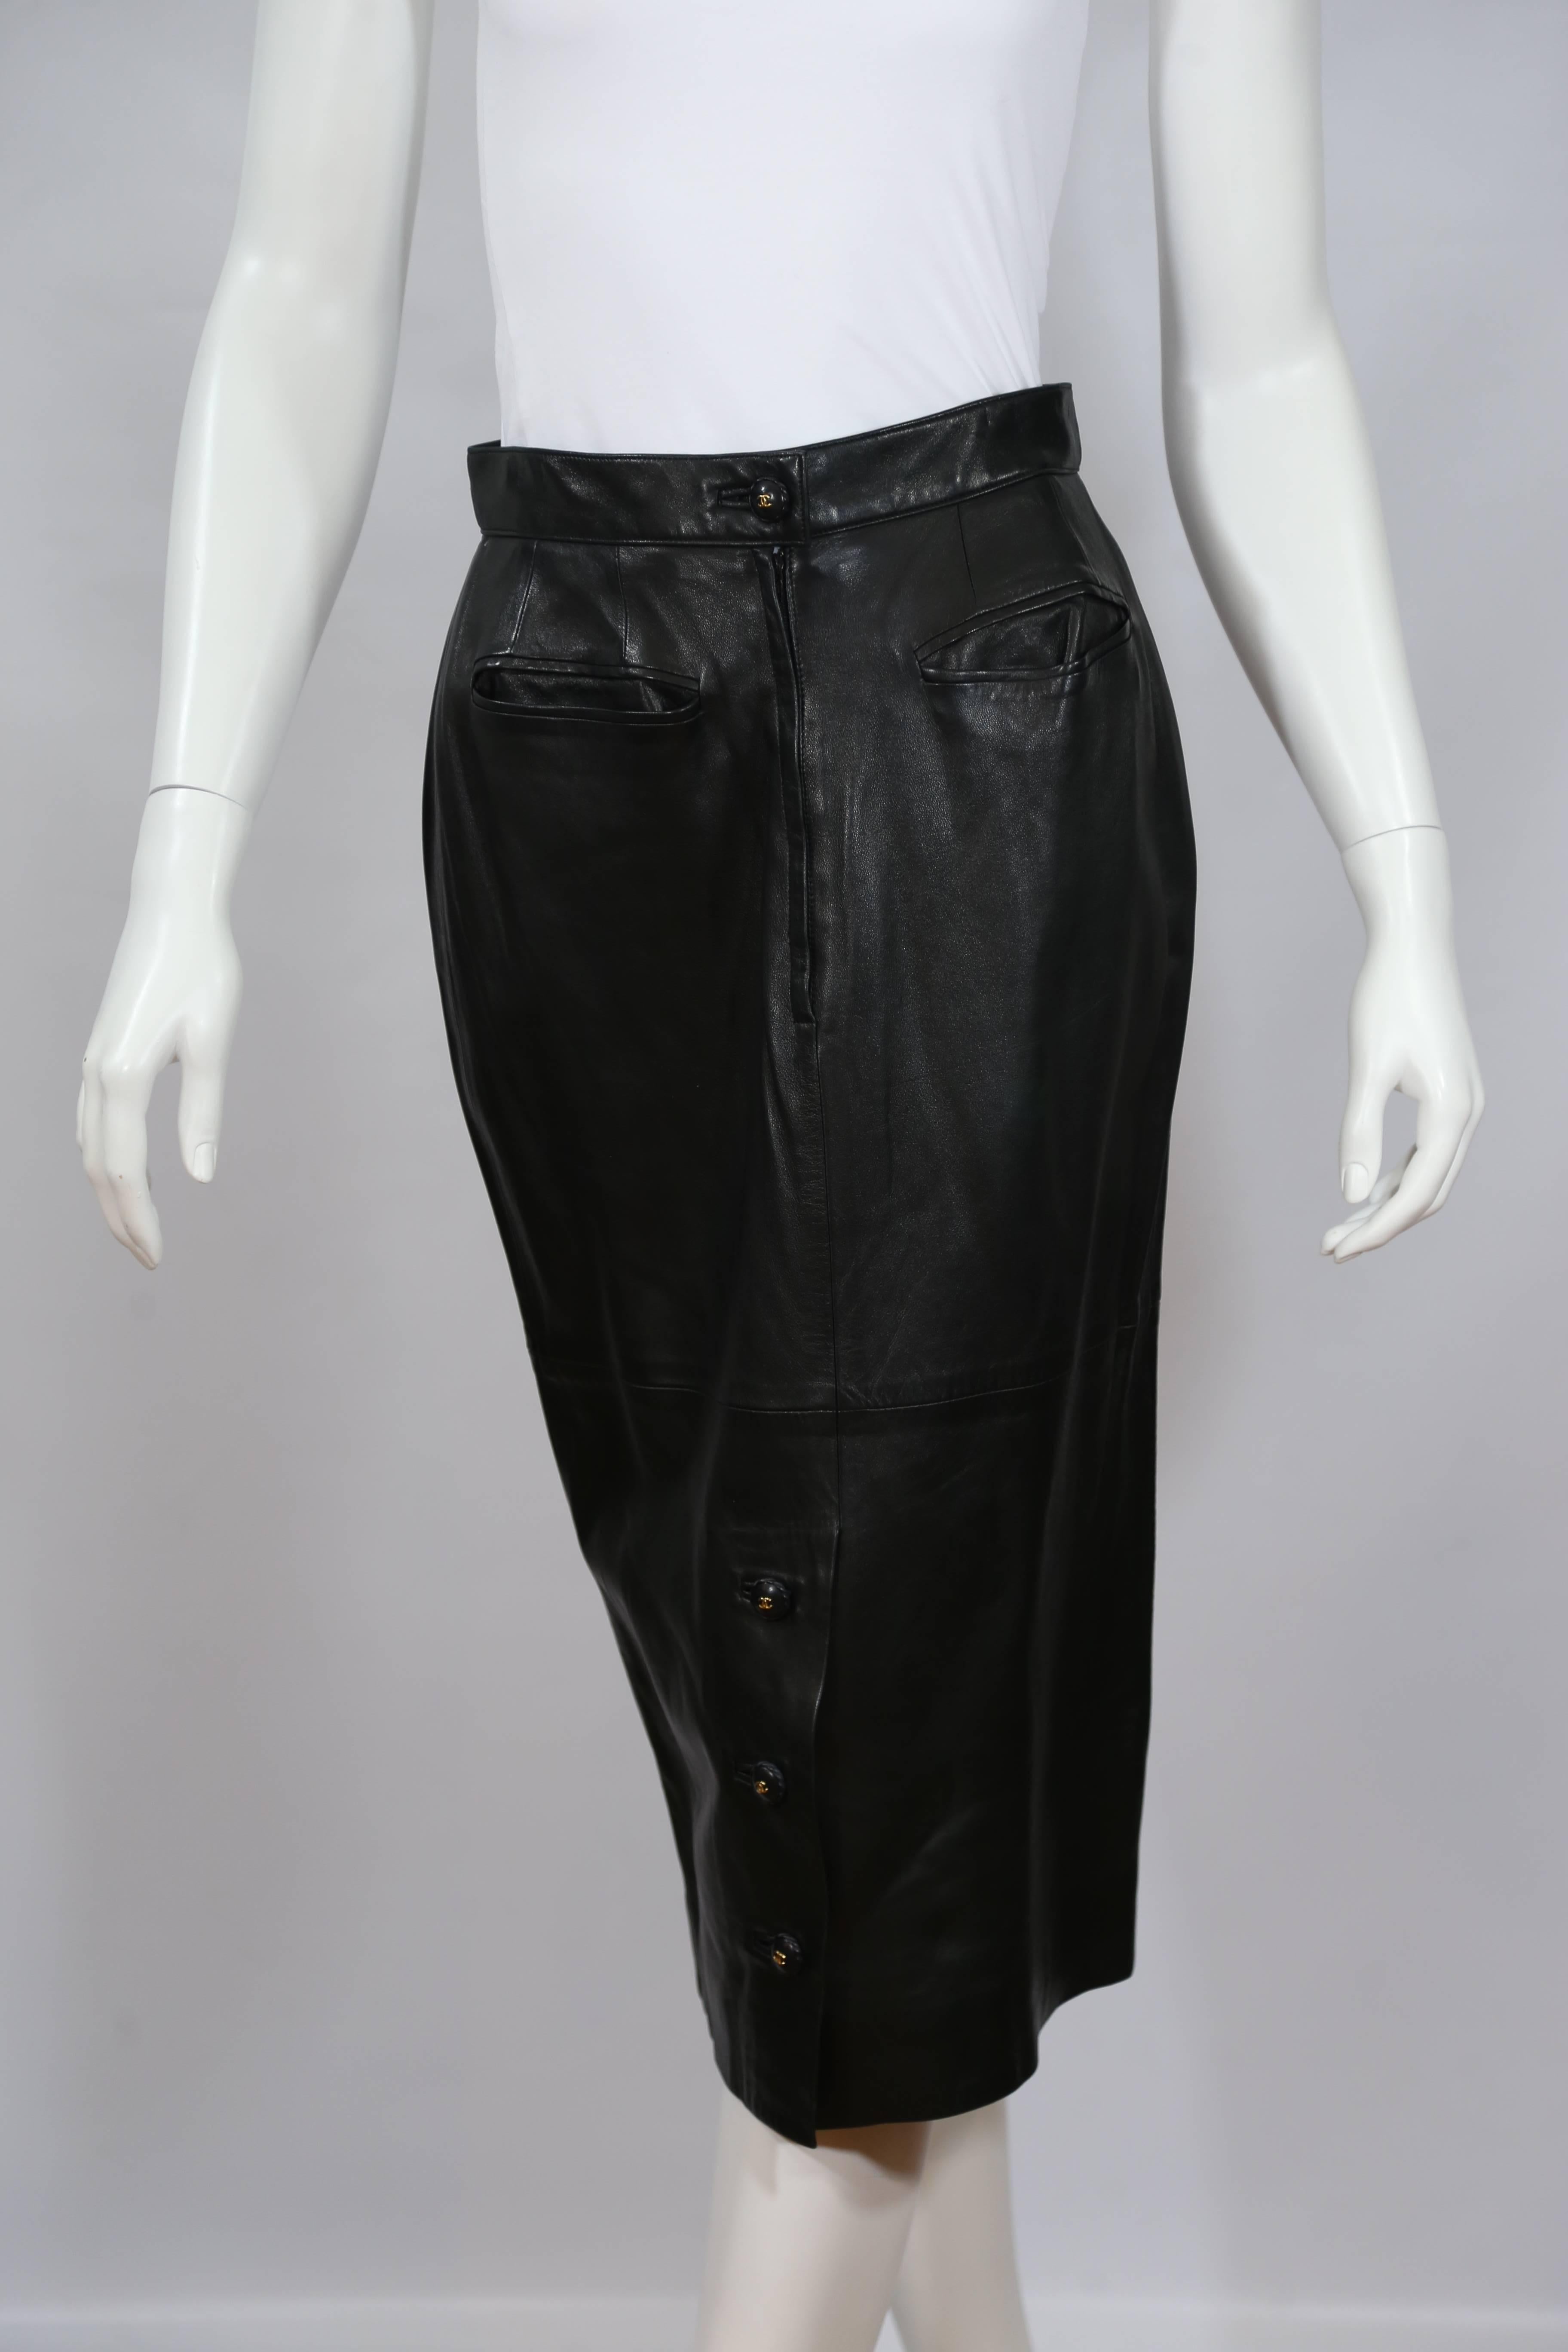 Chanel black leather pencil skirt. 